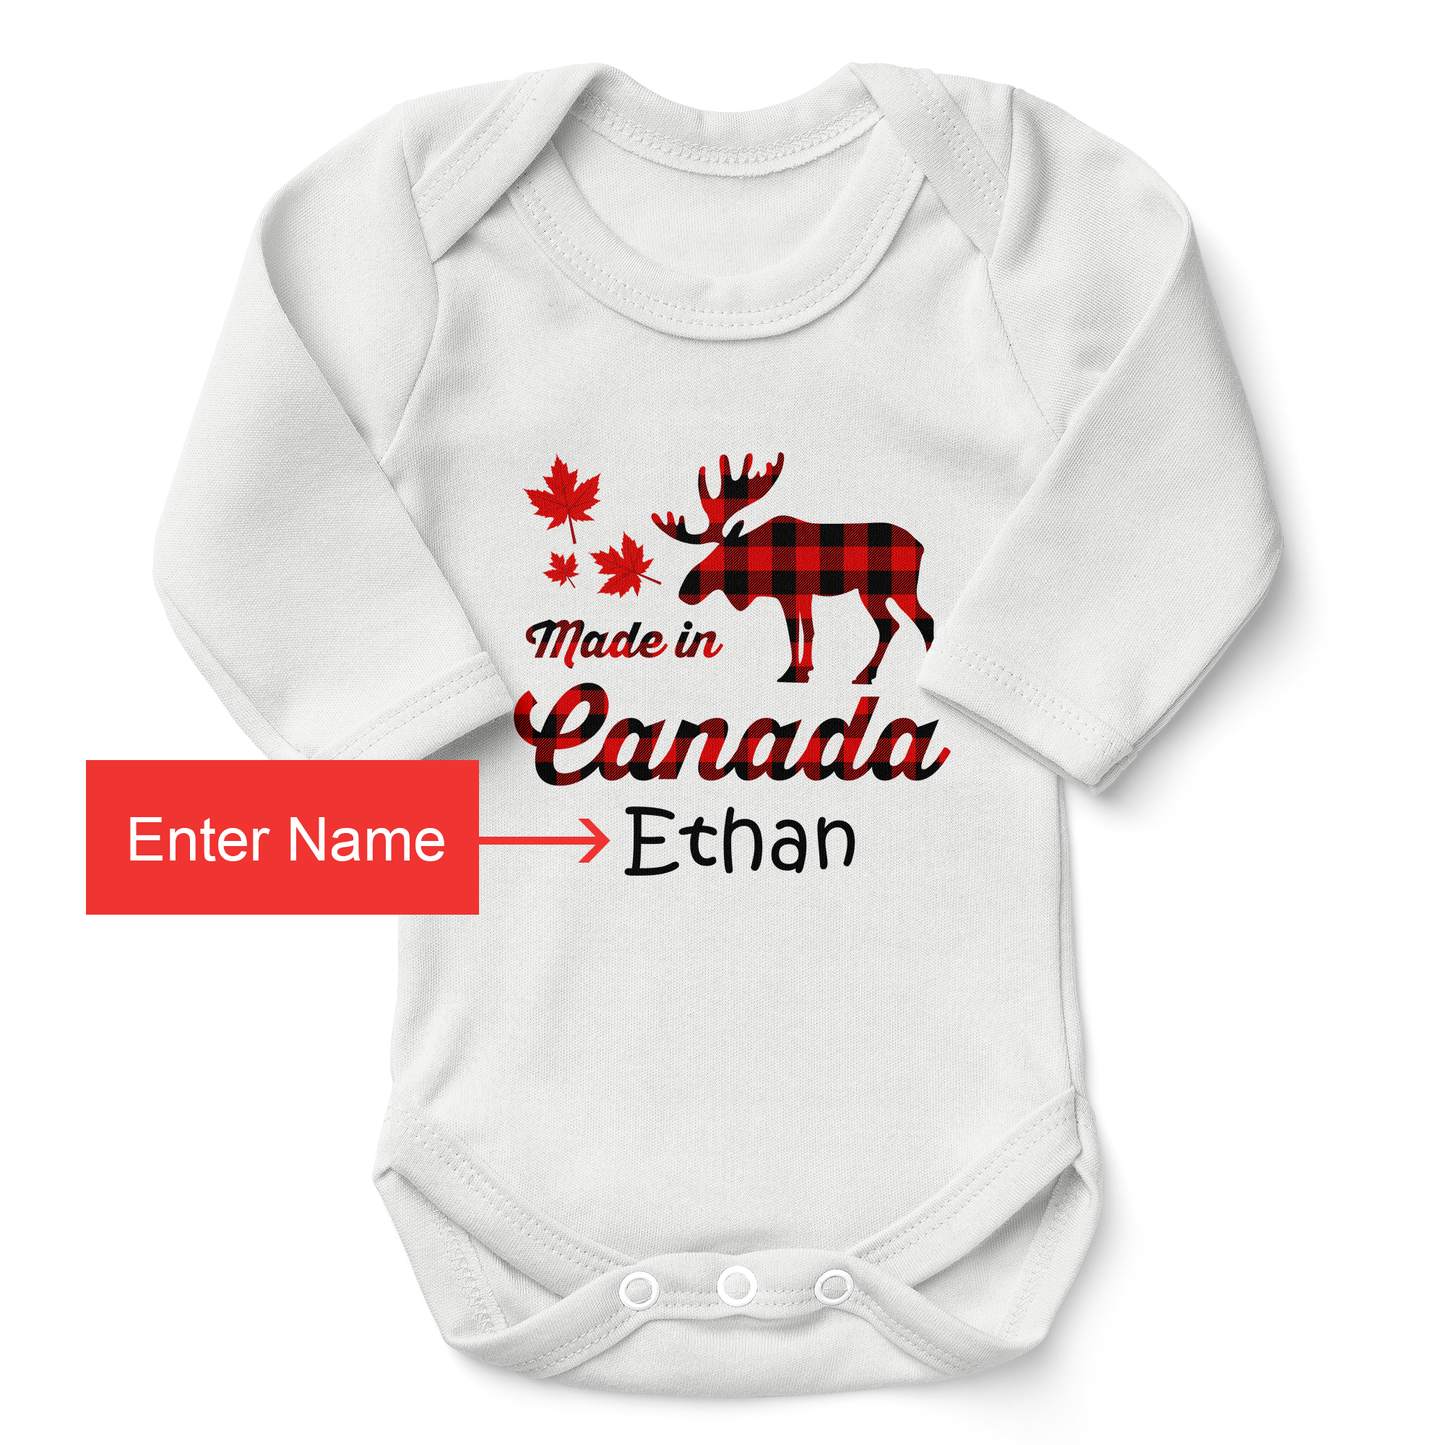 Personalized Organic Long Sleeve Baby Bodysuit - Made In Canada